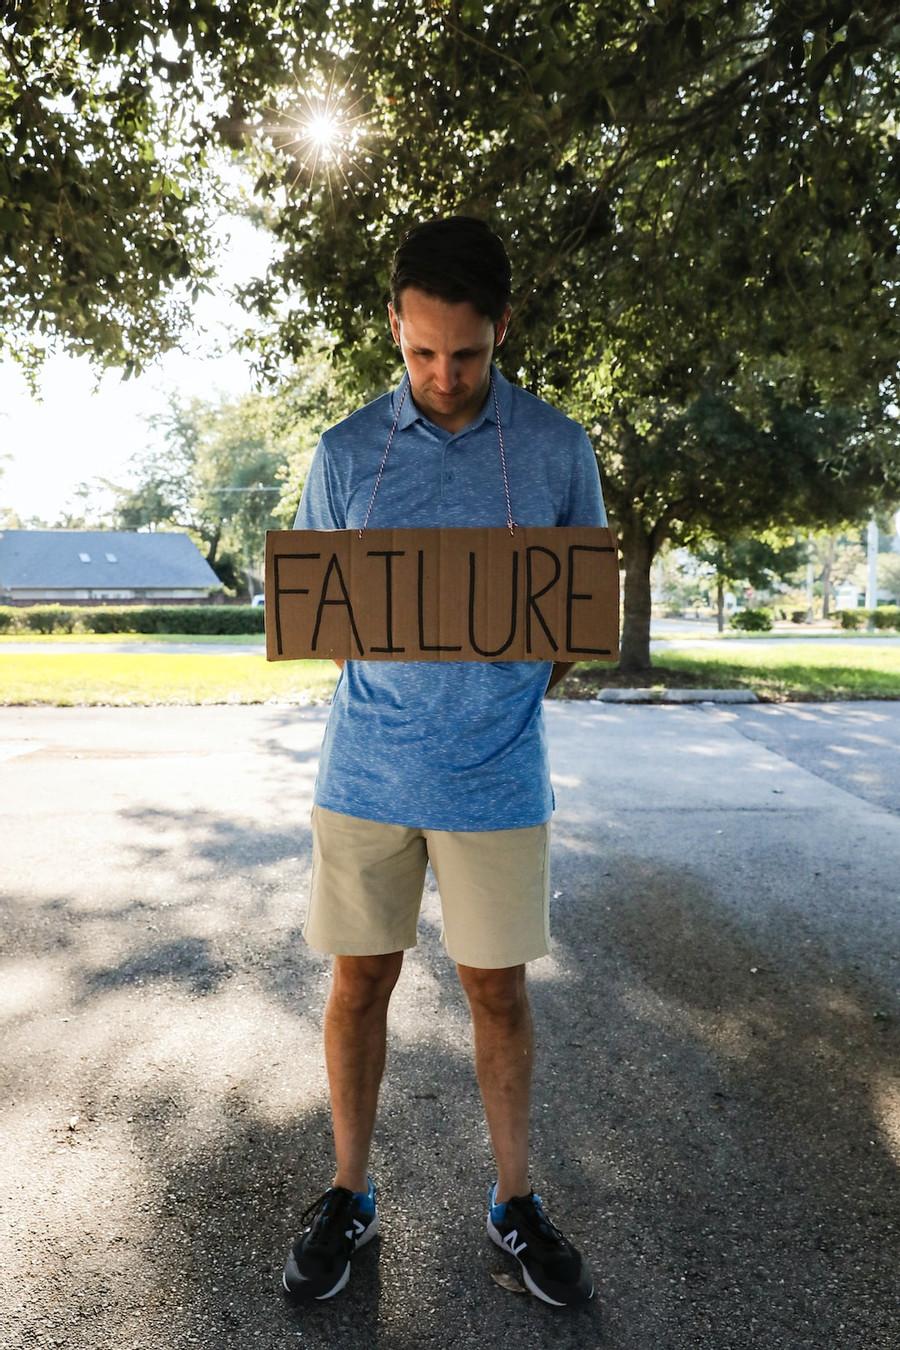 Step 8: Embrace Failure and Learn from Mistakes